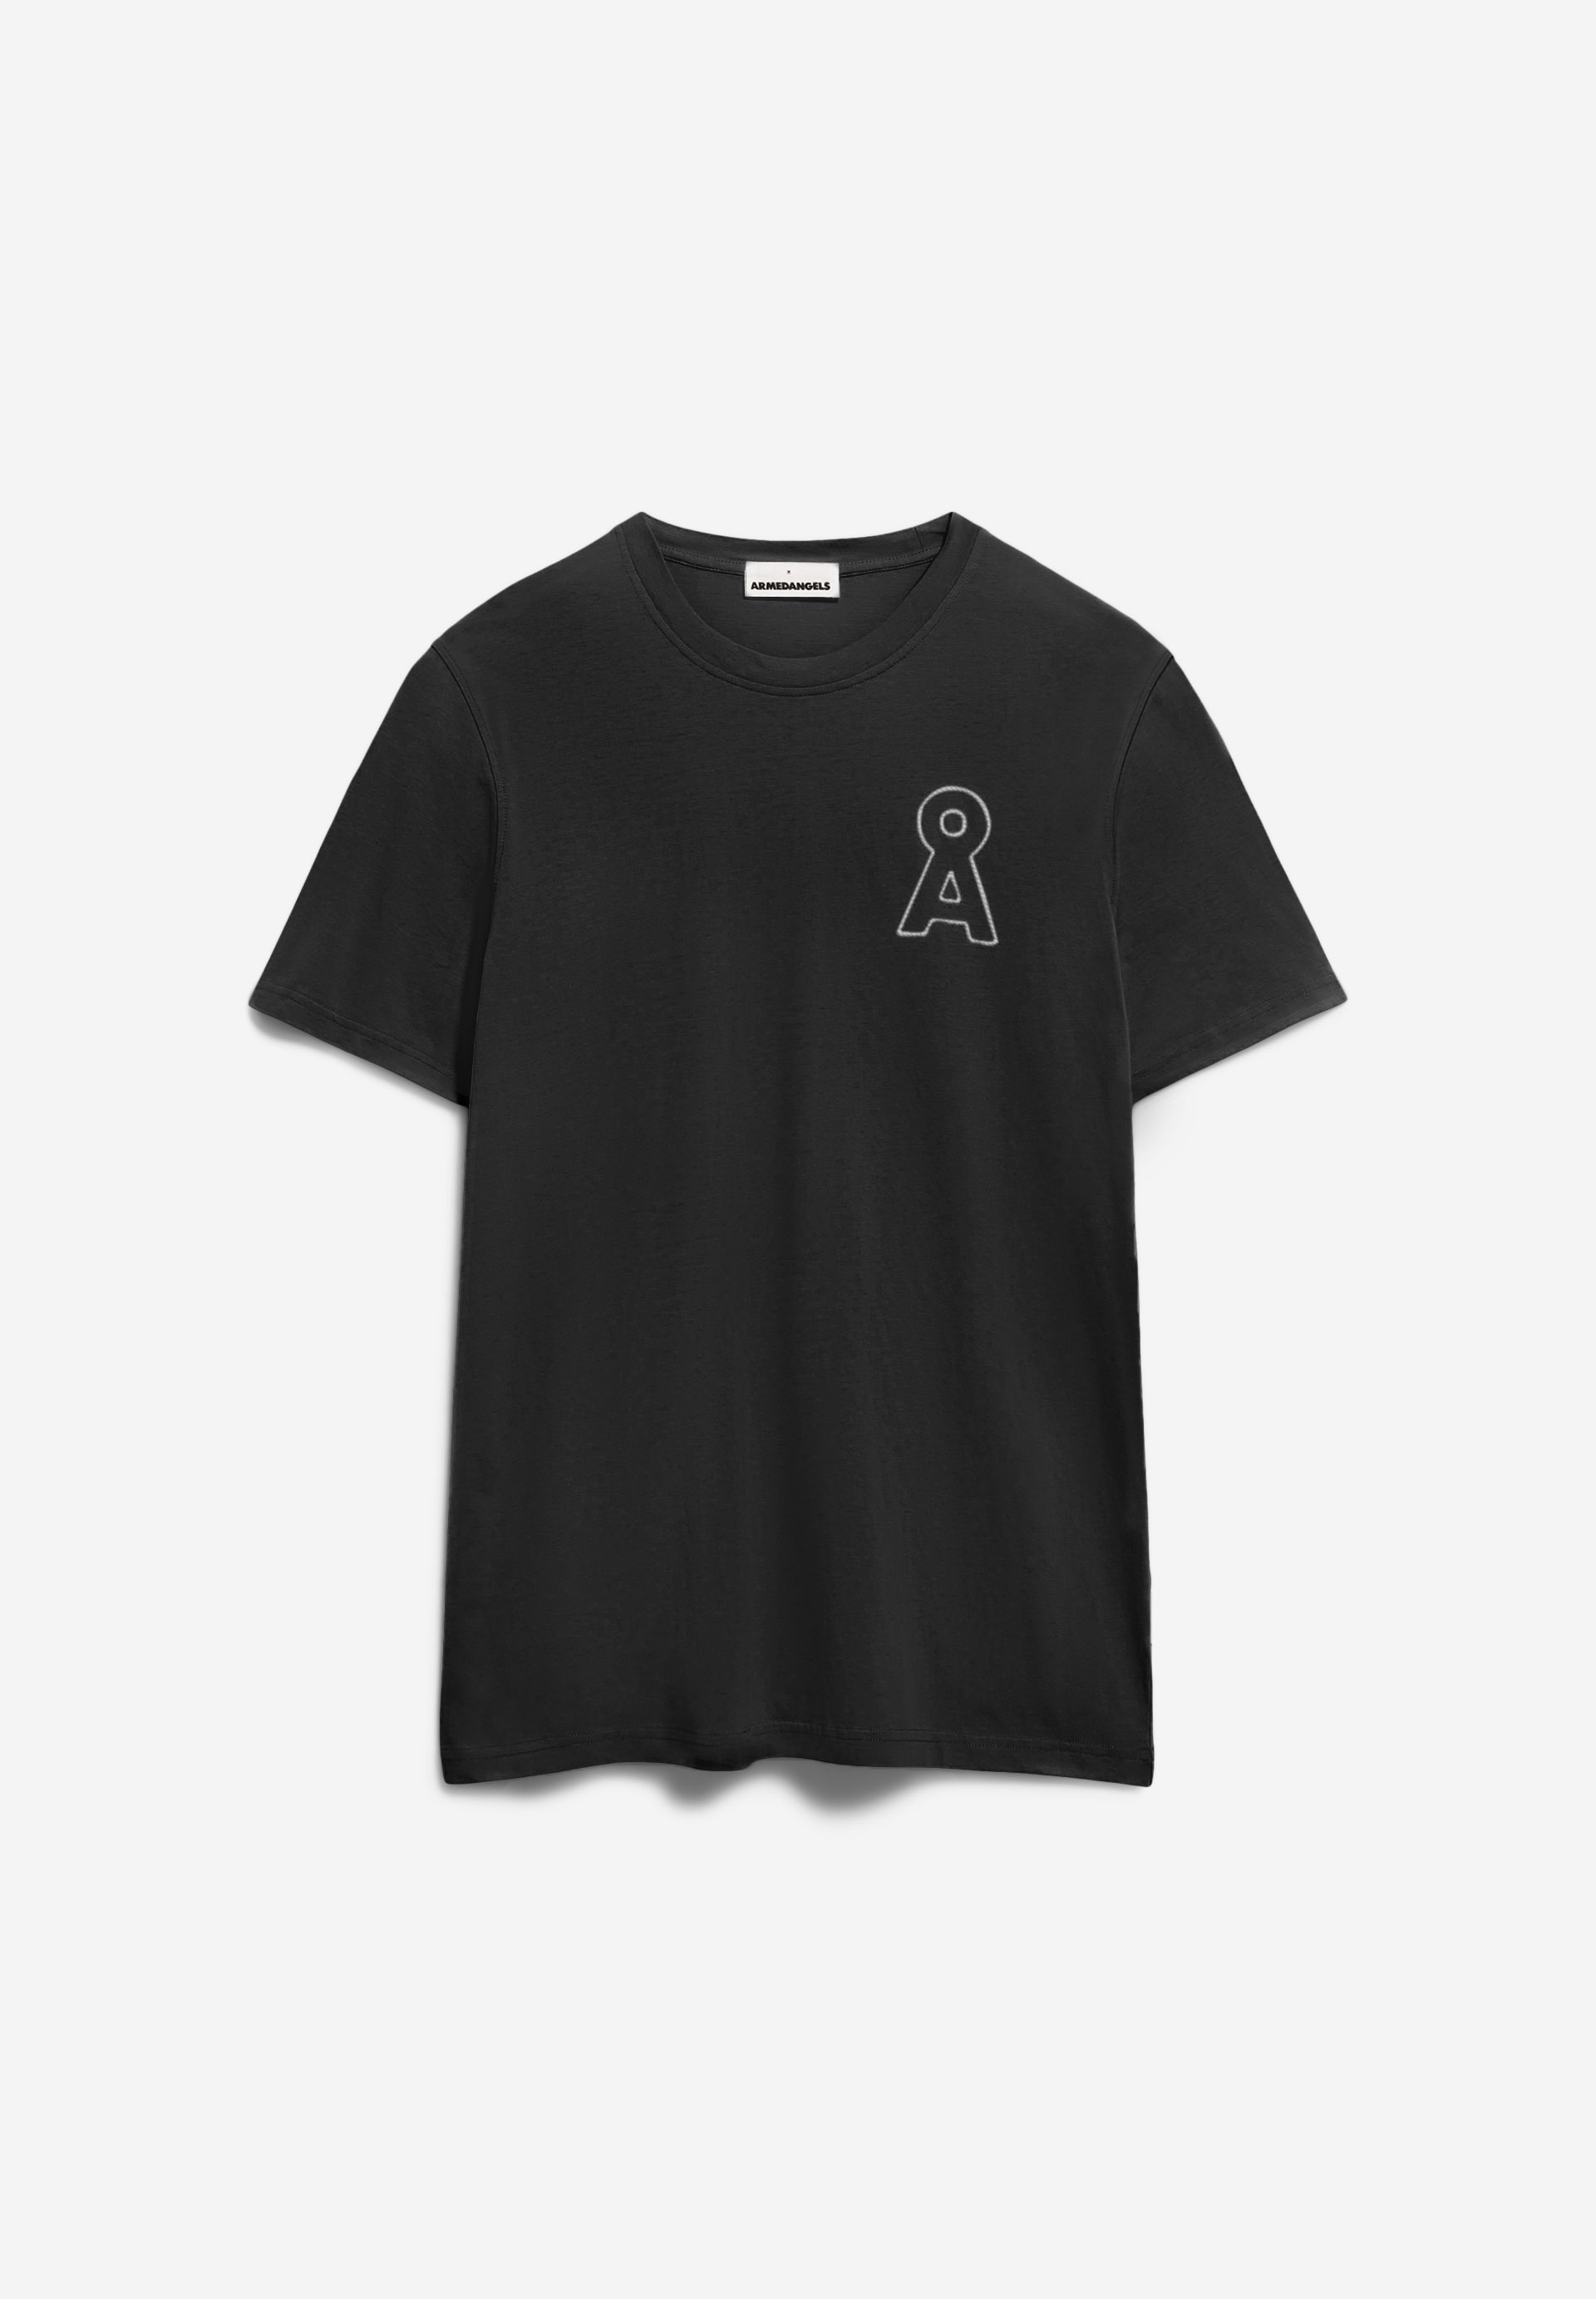 AADONI COLLEGE EMBRO T-Shirt Relaxed Fit made of Organic Cotton